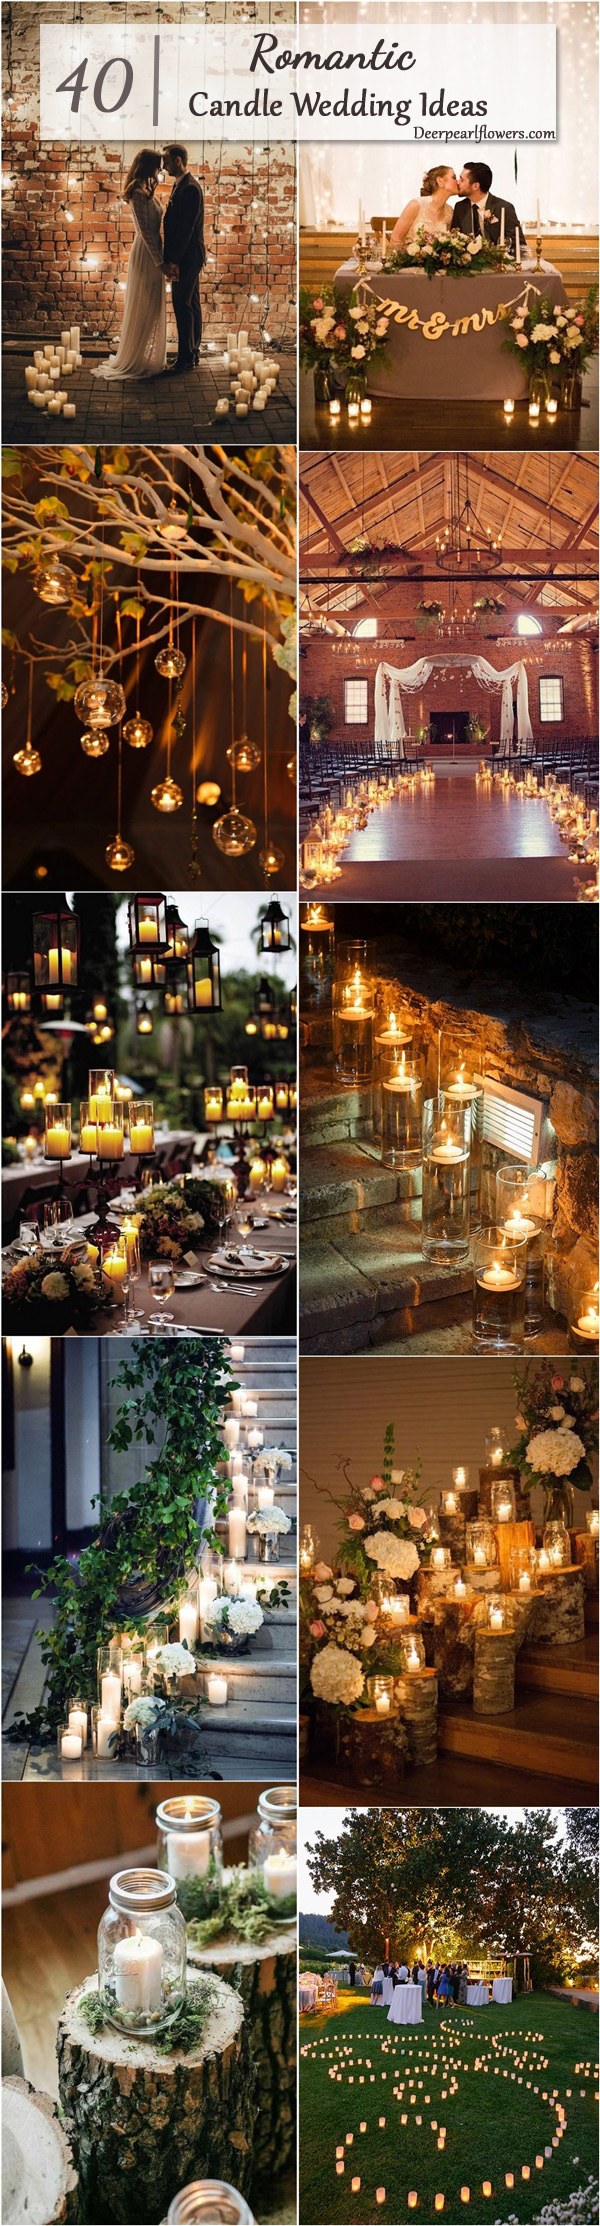 Rustic Country Wedding Ideas with Candles